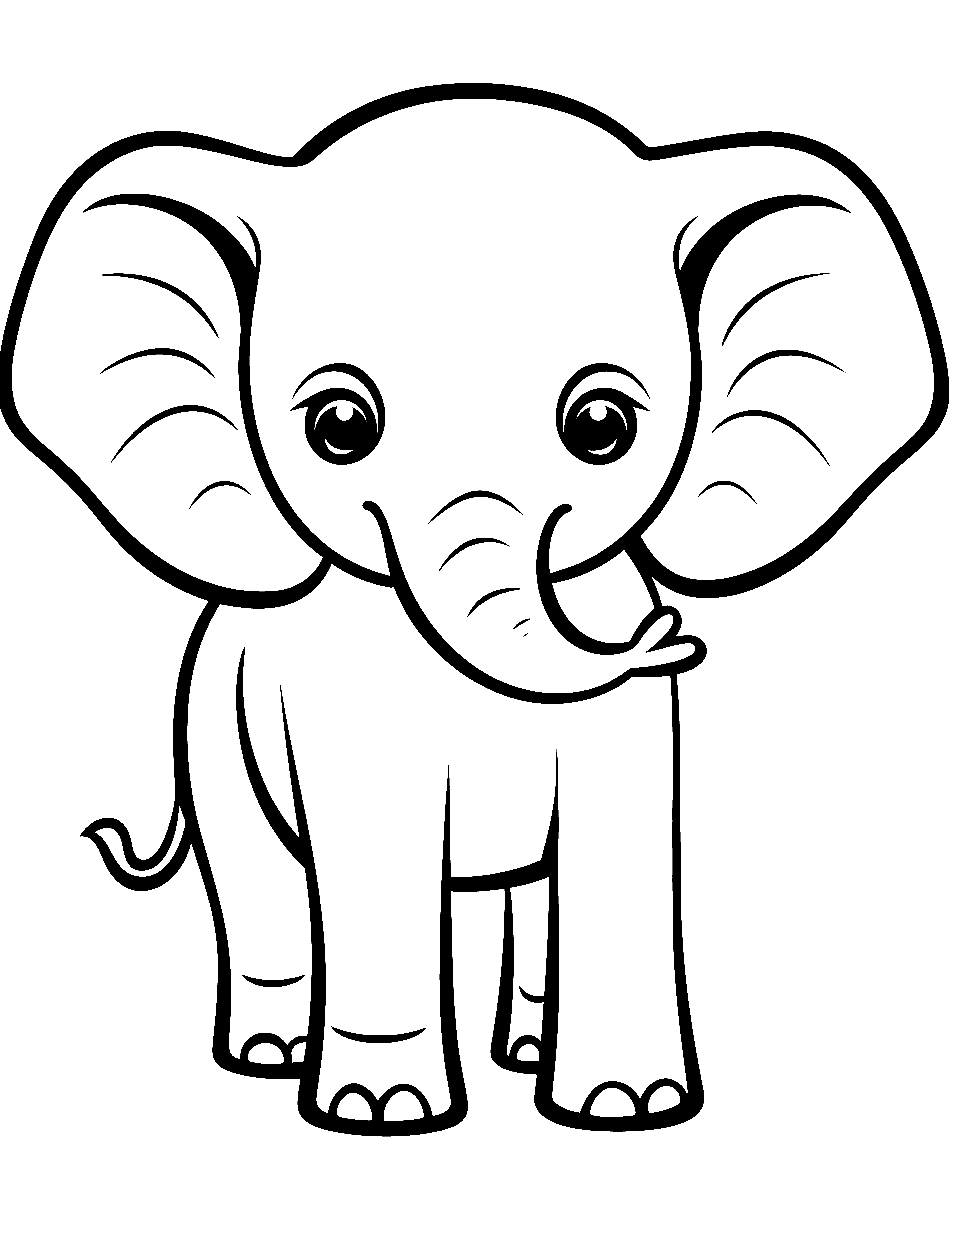 Kawaii Elephant with Big Eyes Coloring Page - An elephant drawn in a kawaii style with a round body and oversized sparkly eyes.